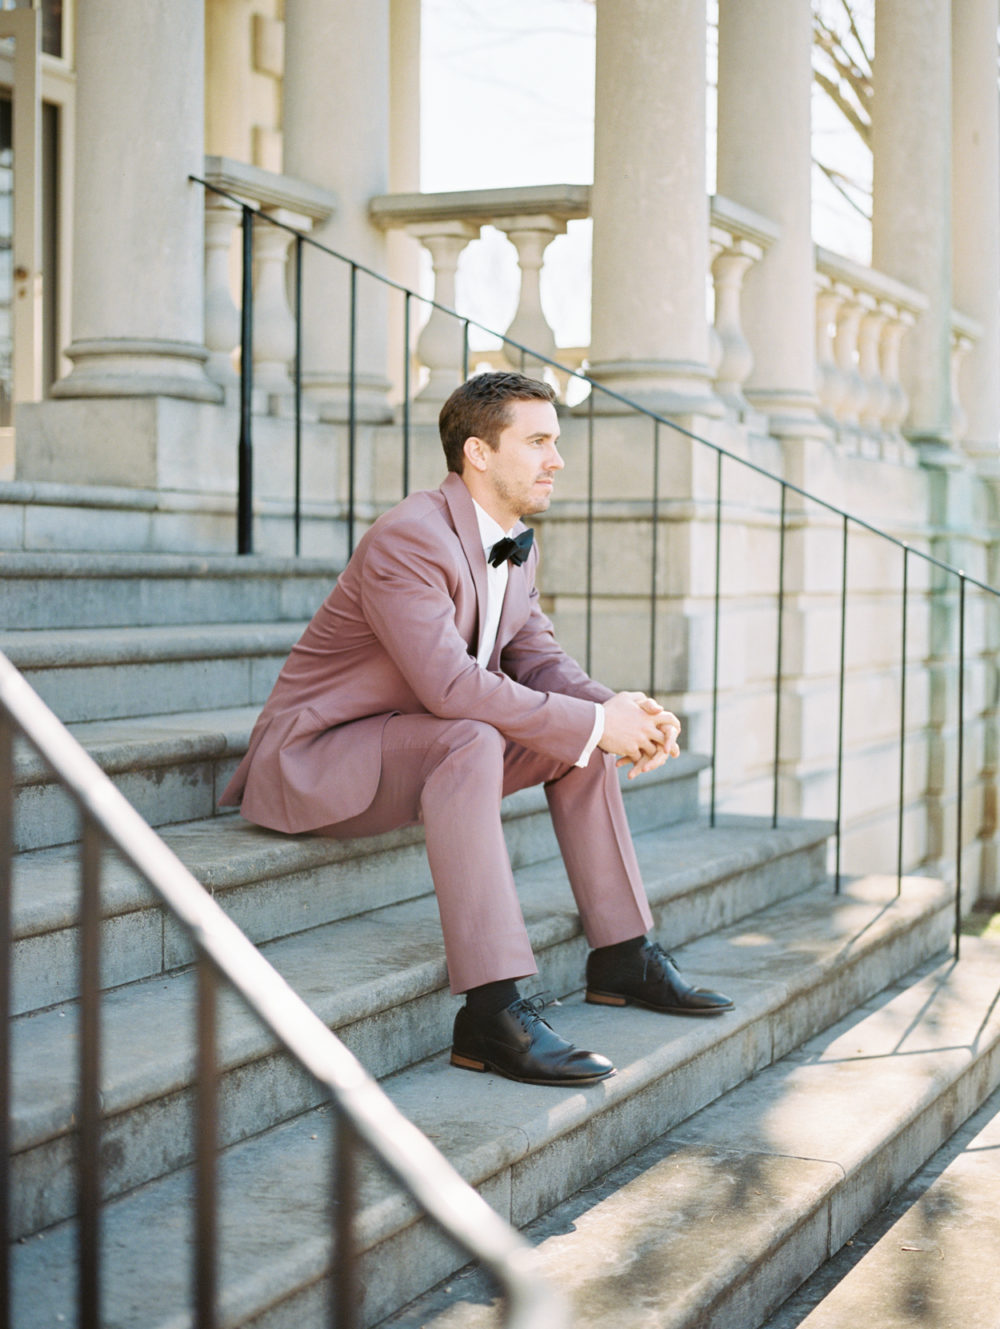 Burgundy groom's suit for wedding day at Great Marsh Estate 